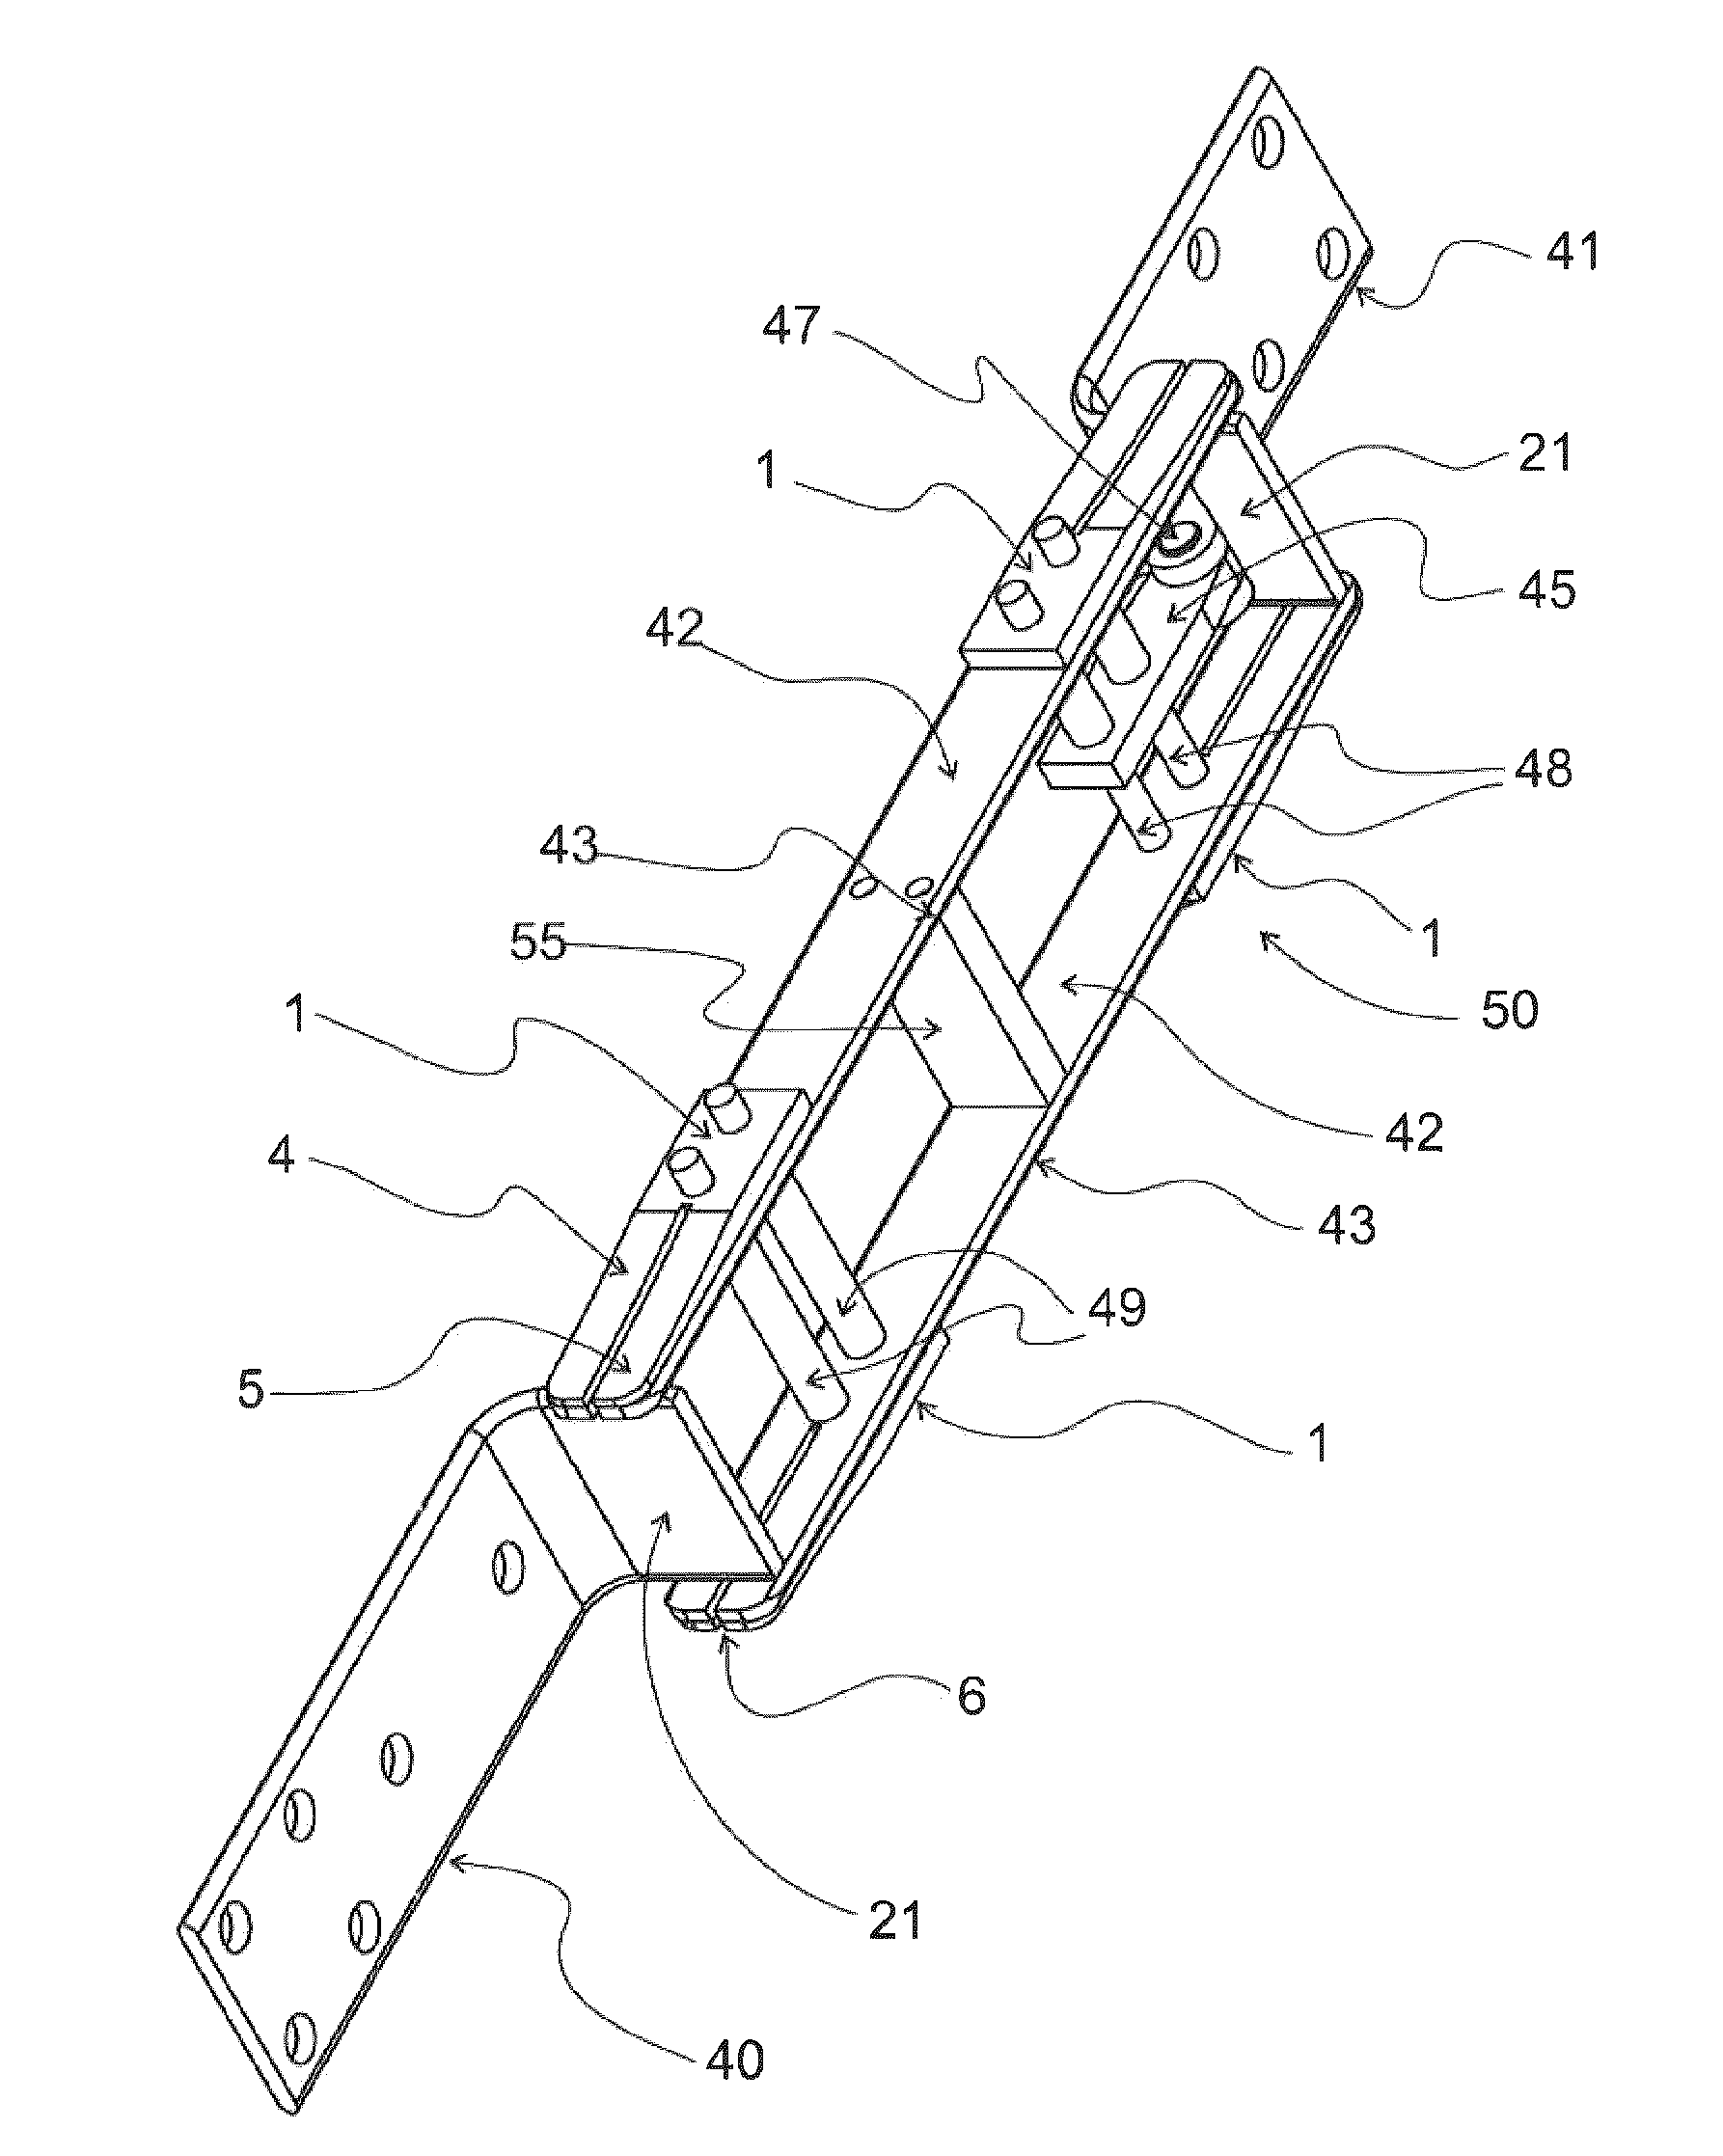 High-Voltage Disconnection Knife for Outdoor Use With Air Insulation